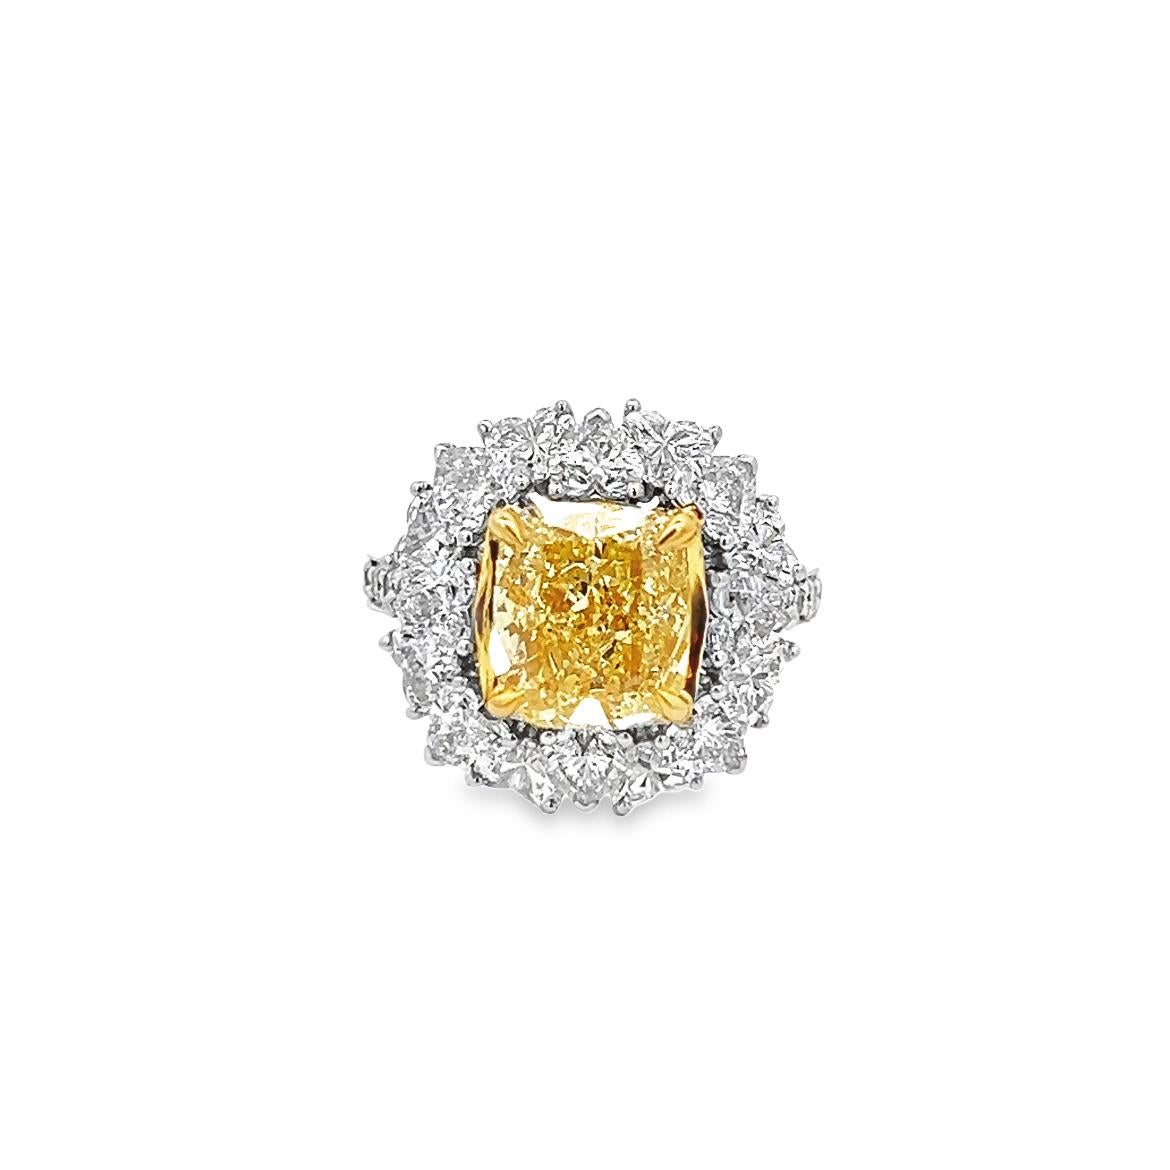 This exceptional 3.63ct cushion-modified brilliant, natural fancy yellow even, clarity SI1 GIA certified diamond ring is a true masterpiece. Its handmade design and 18k yellow gold setting make it a truly remarkable piece of jewelry that is sure to